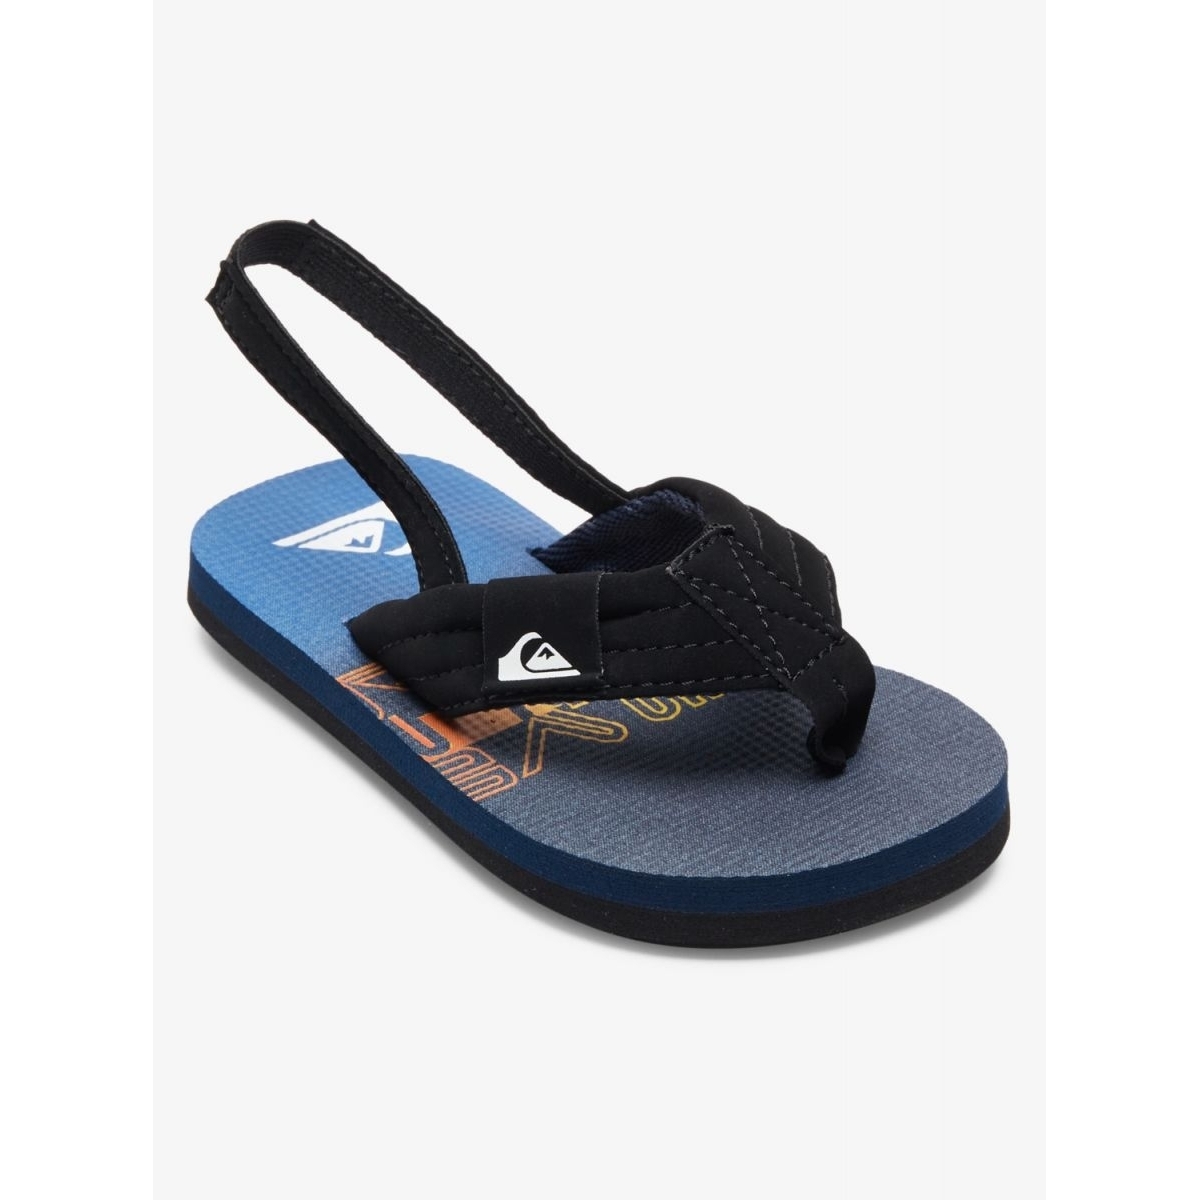 Quiksilver Toddlers' Molokai Layback Flip Flop Sandals Blue 3 - AQTL100066-BYJ3 BLUE 3 - BLUE 3, 6 Toddler